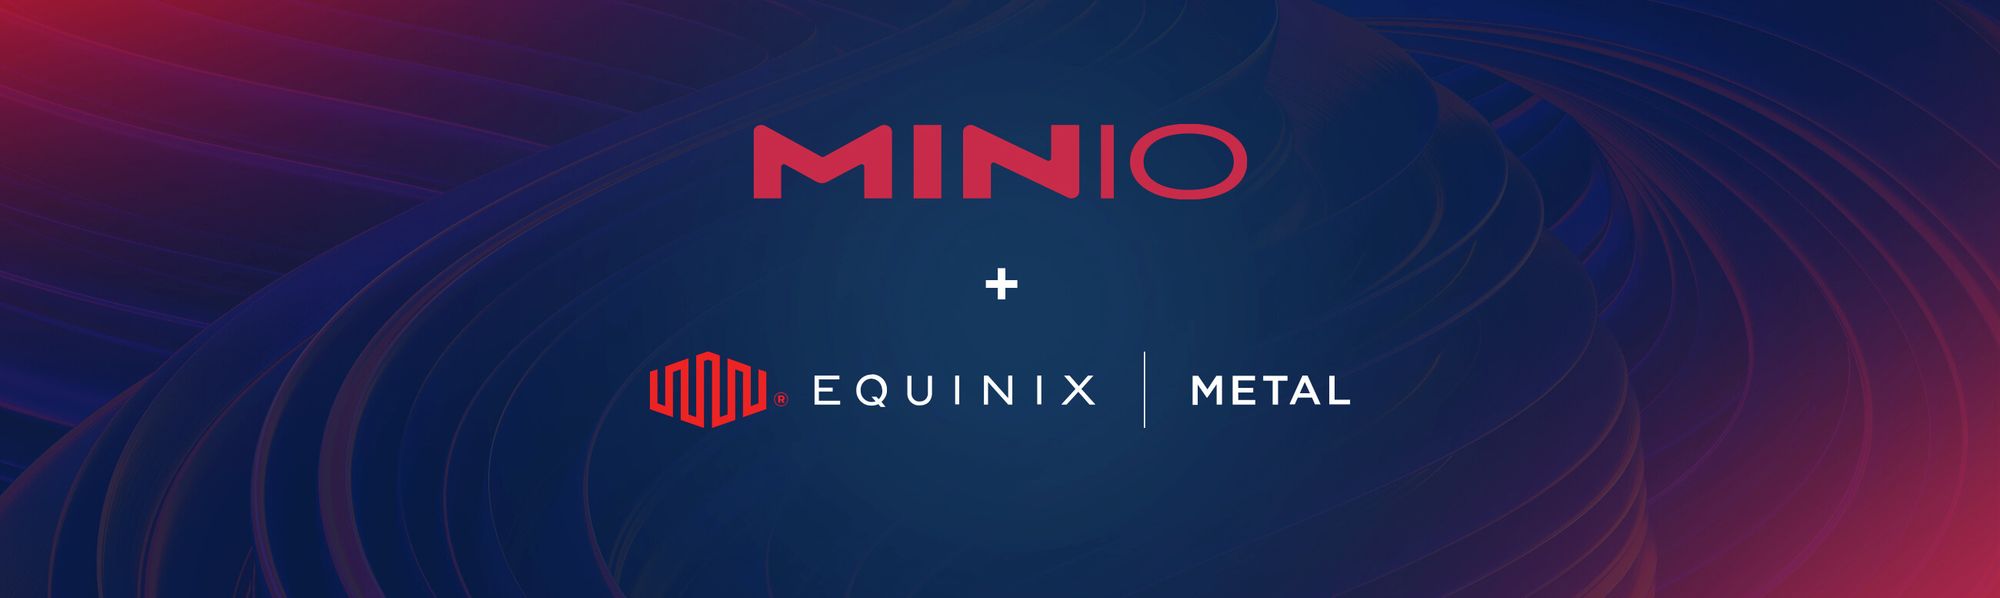 Migrate from AWS S3 to MinIO on Equinix Metal